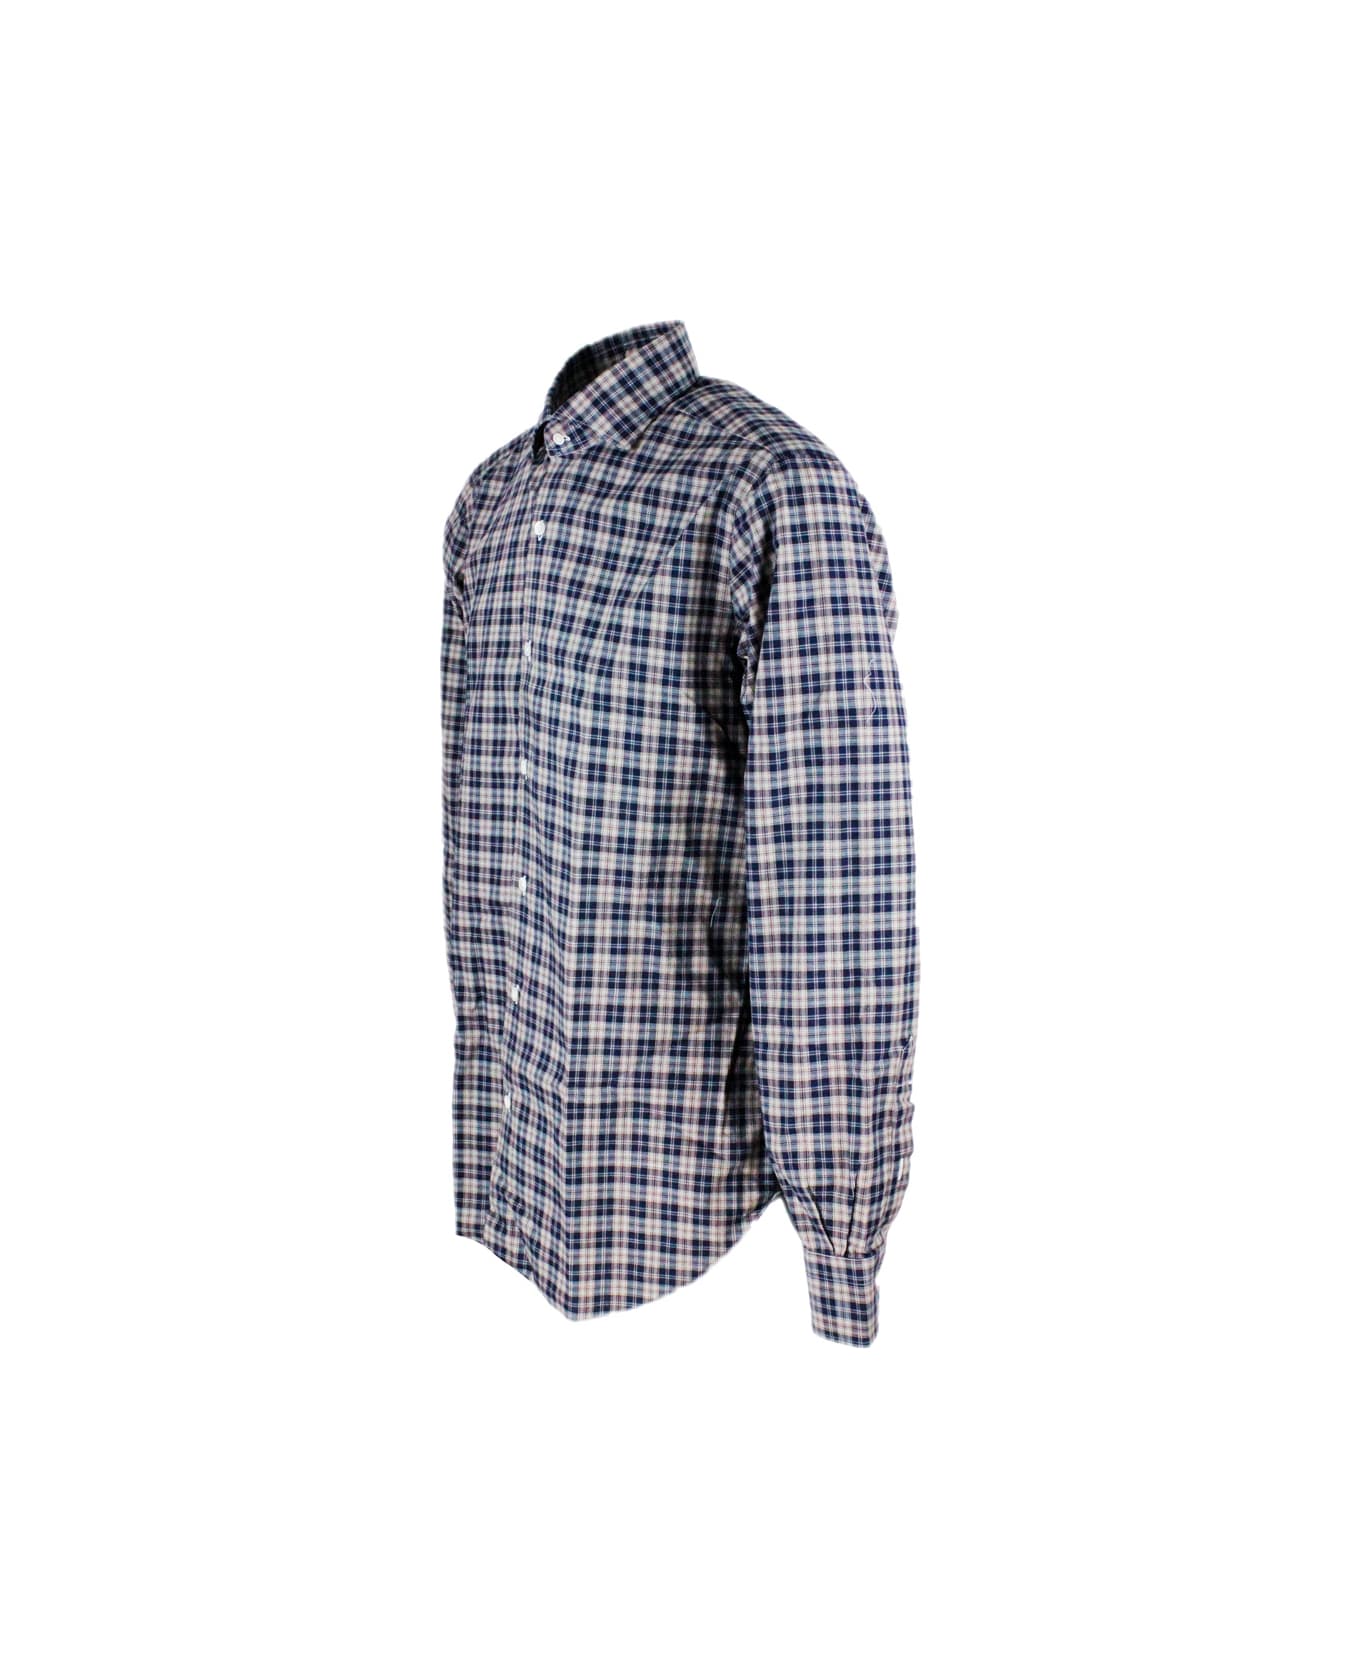 Barba Napoli Cult Shirt With Two-tone Checked Pattern - Blu シャツ